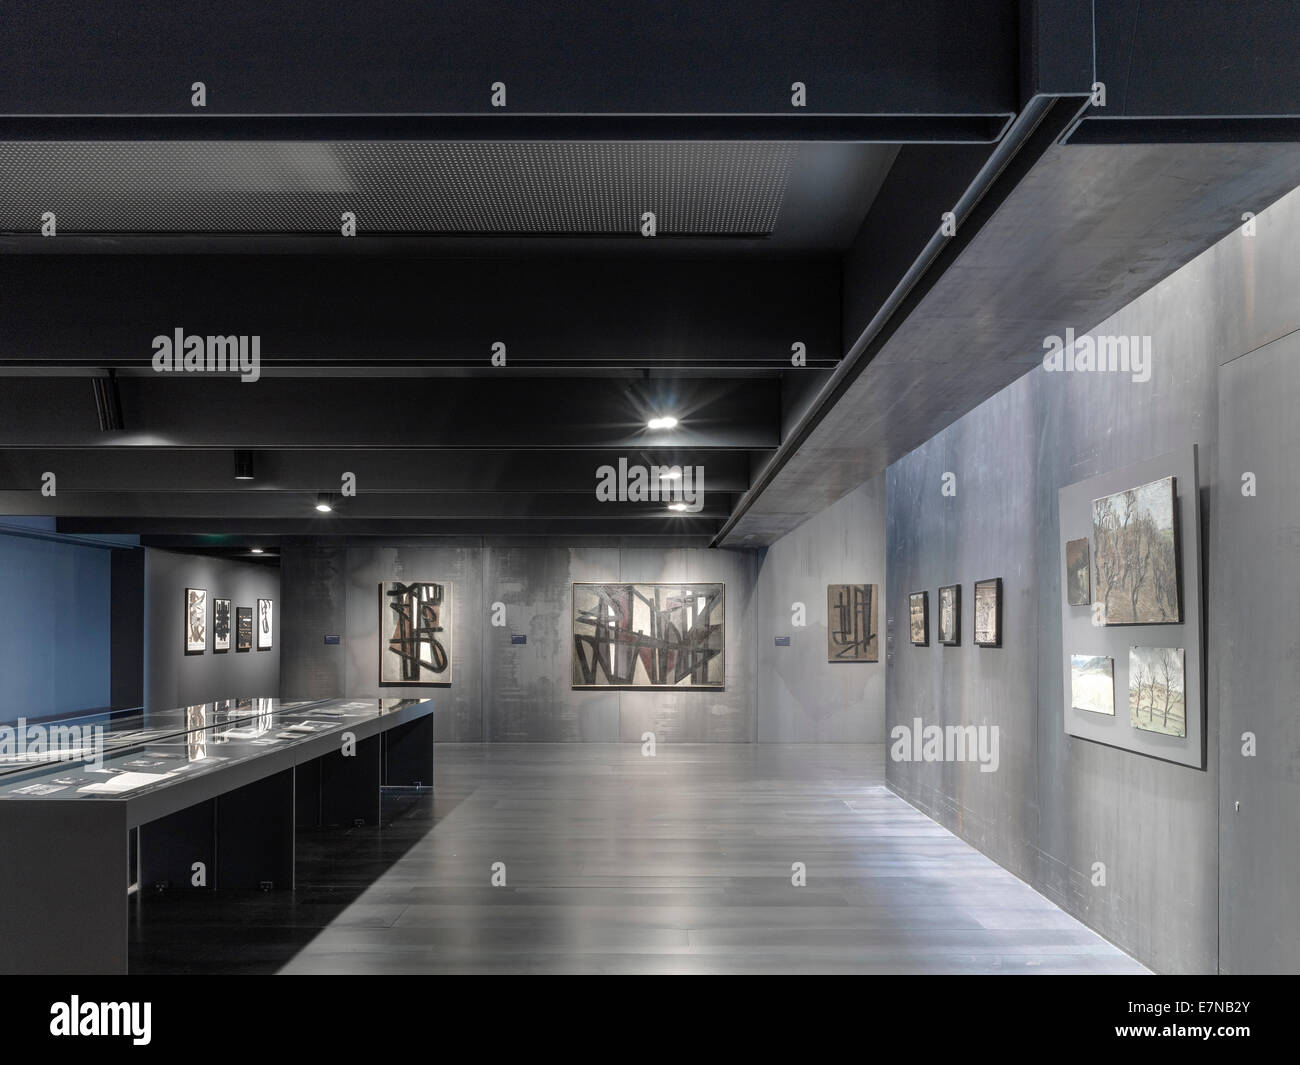 Museum Soulages, Rodez, France. Architect: RCR Arquitectes, 2014. Exhibition space with display cabinets. Stock Photo